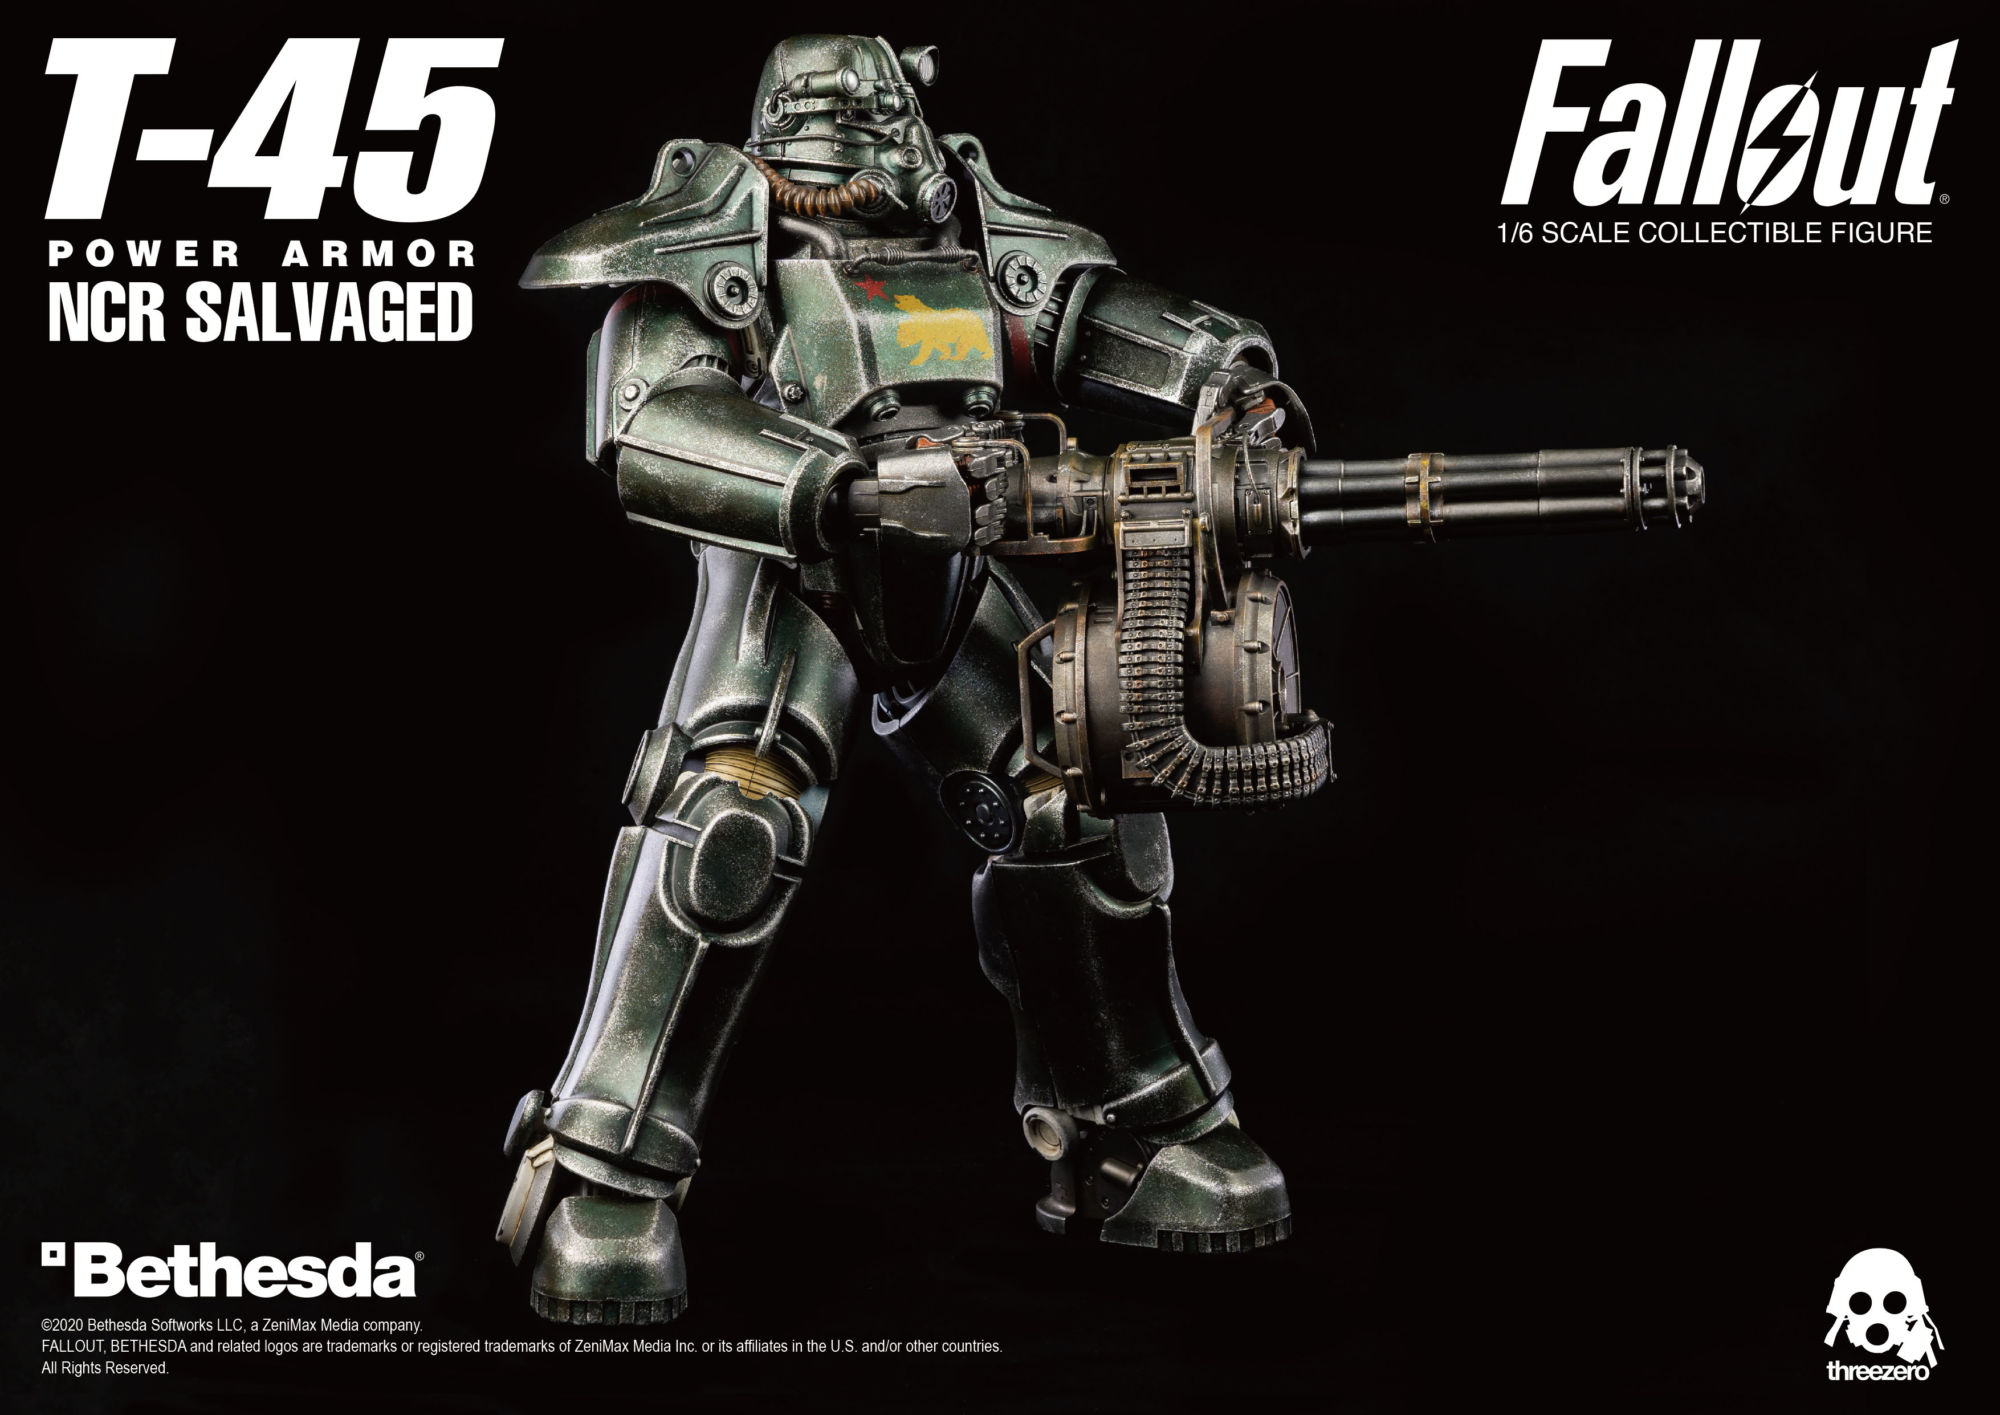 T 45 Power Armor News Rumors And Information Bleeding Cool News And Rumors Page 1